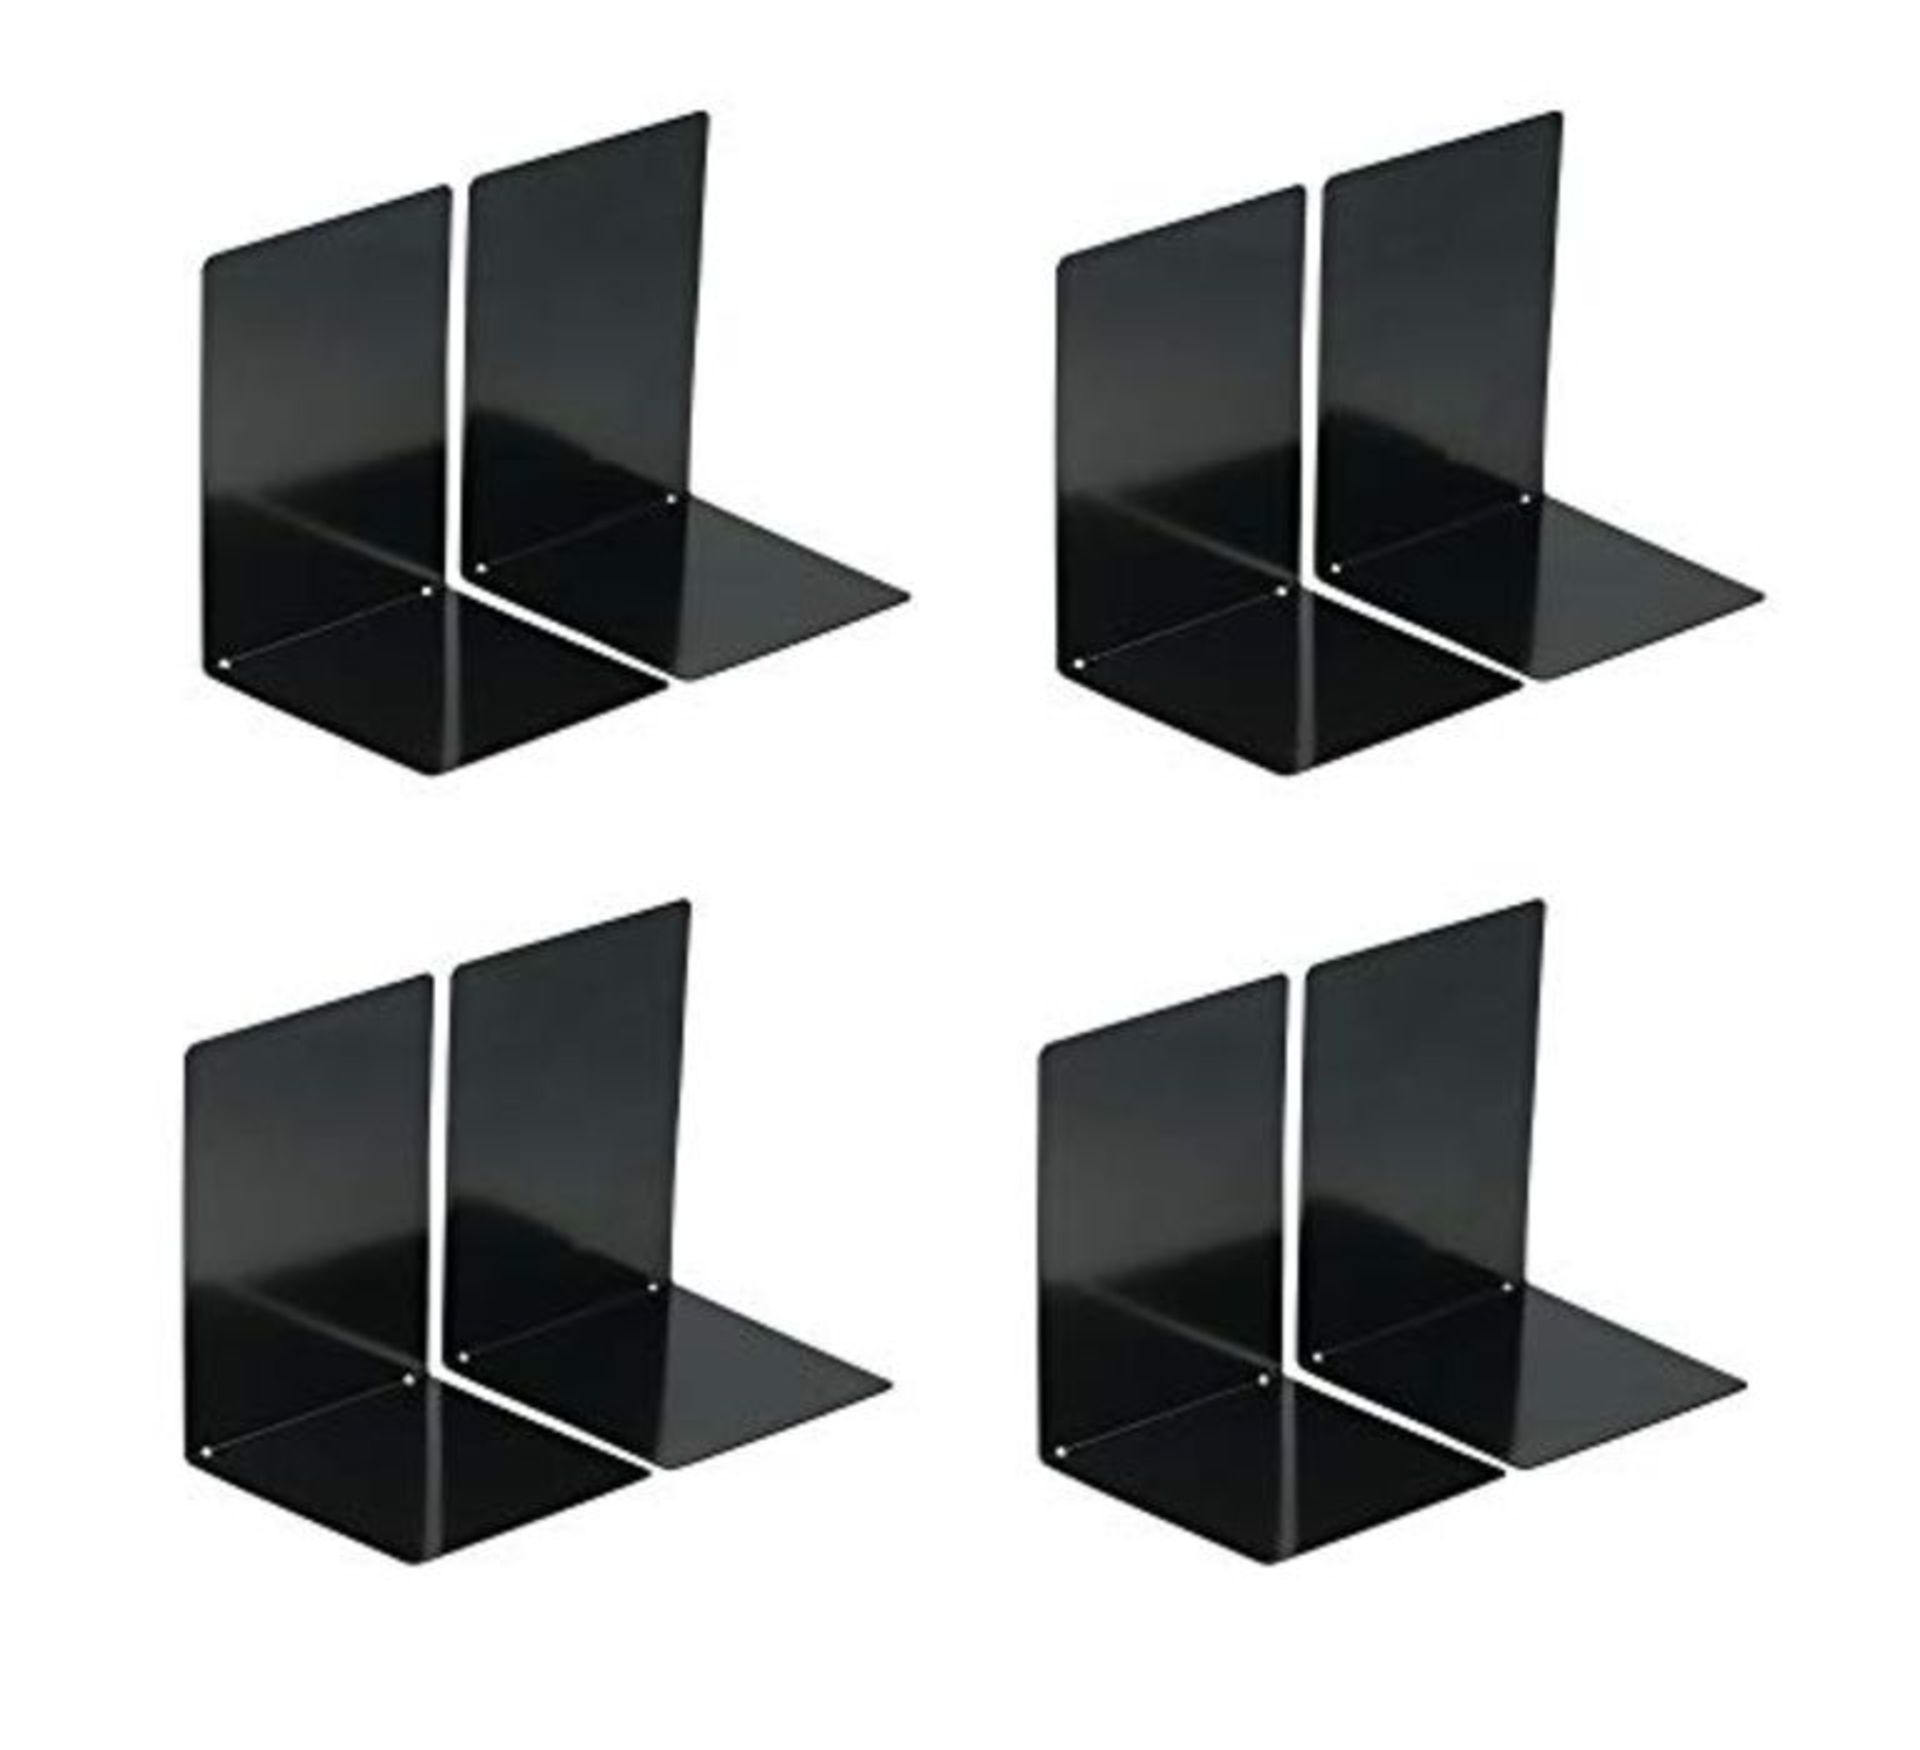 Officemate Heavy Duty Bookends (4 Pairs) for Shelves, Office, School & HomeMetal Book